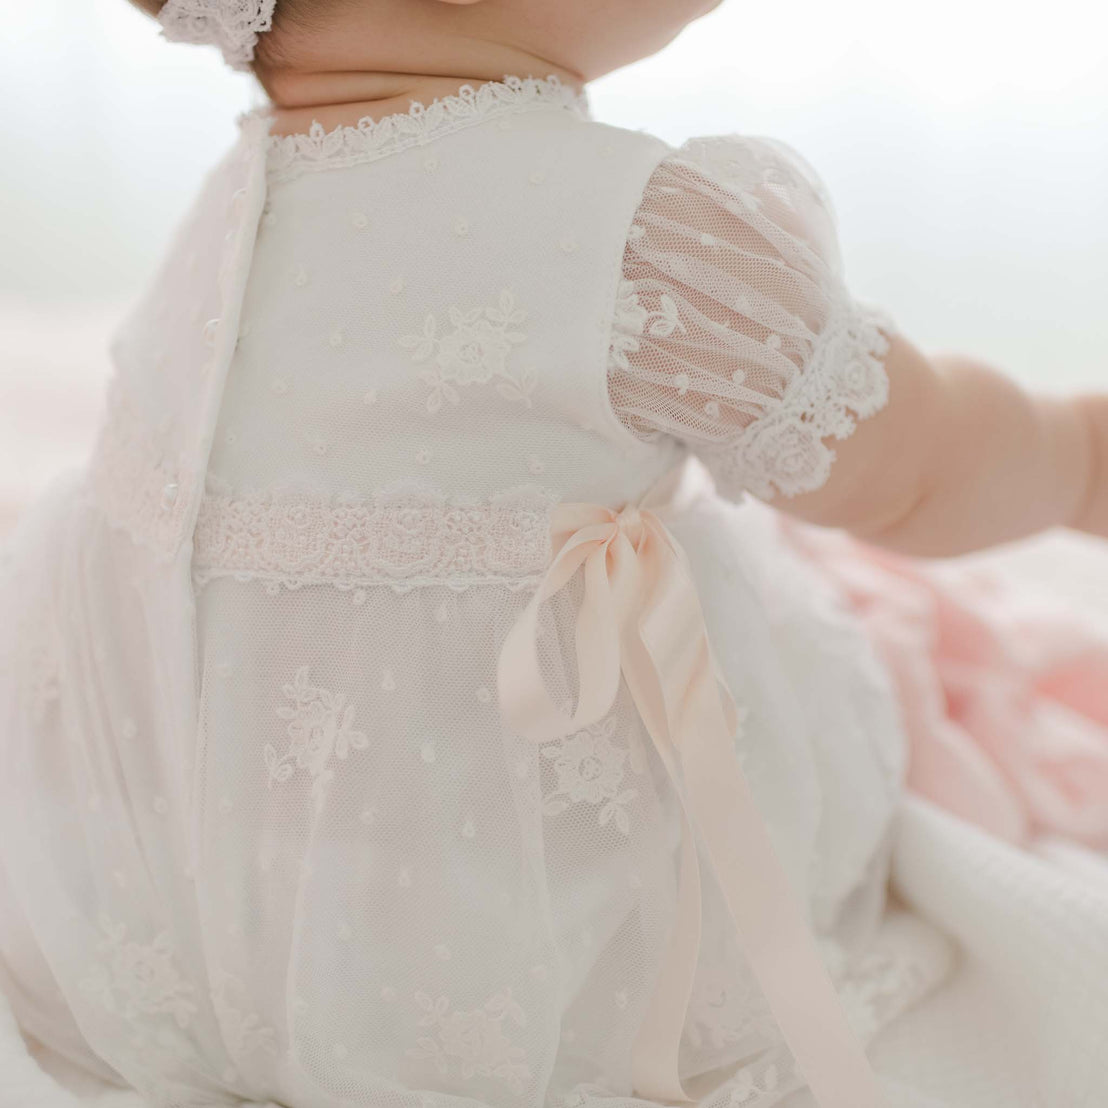 A baby is wearing a delicate, white pima cotton dress with intricate floral embroidery and sheer, patterned sleeves. A soft, pink ribbon bow ties at the back. The baby is sitting and facing away from the camera, showcasing the details of the Melissa Christening Gown & Bonnet adorned with Venice lace trim.